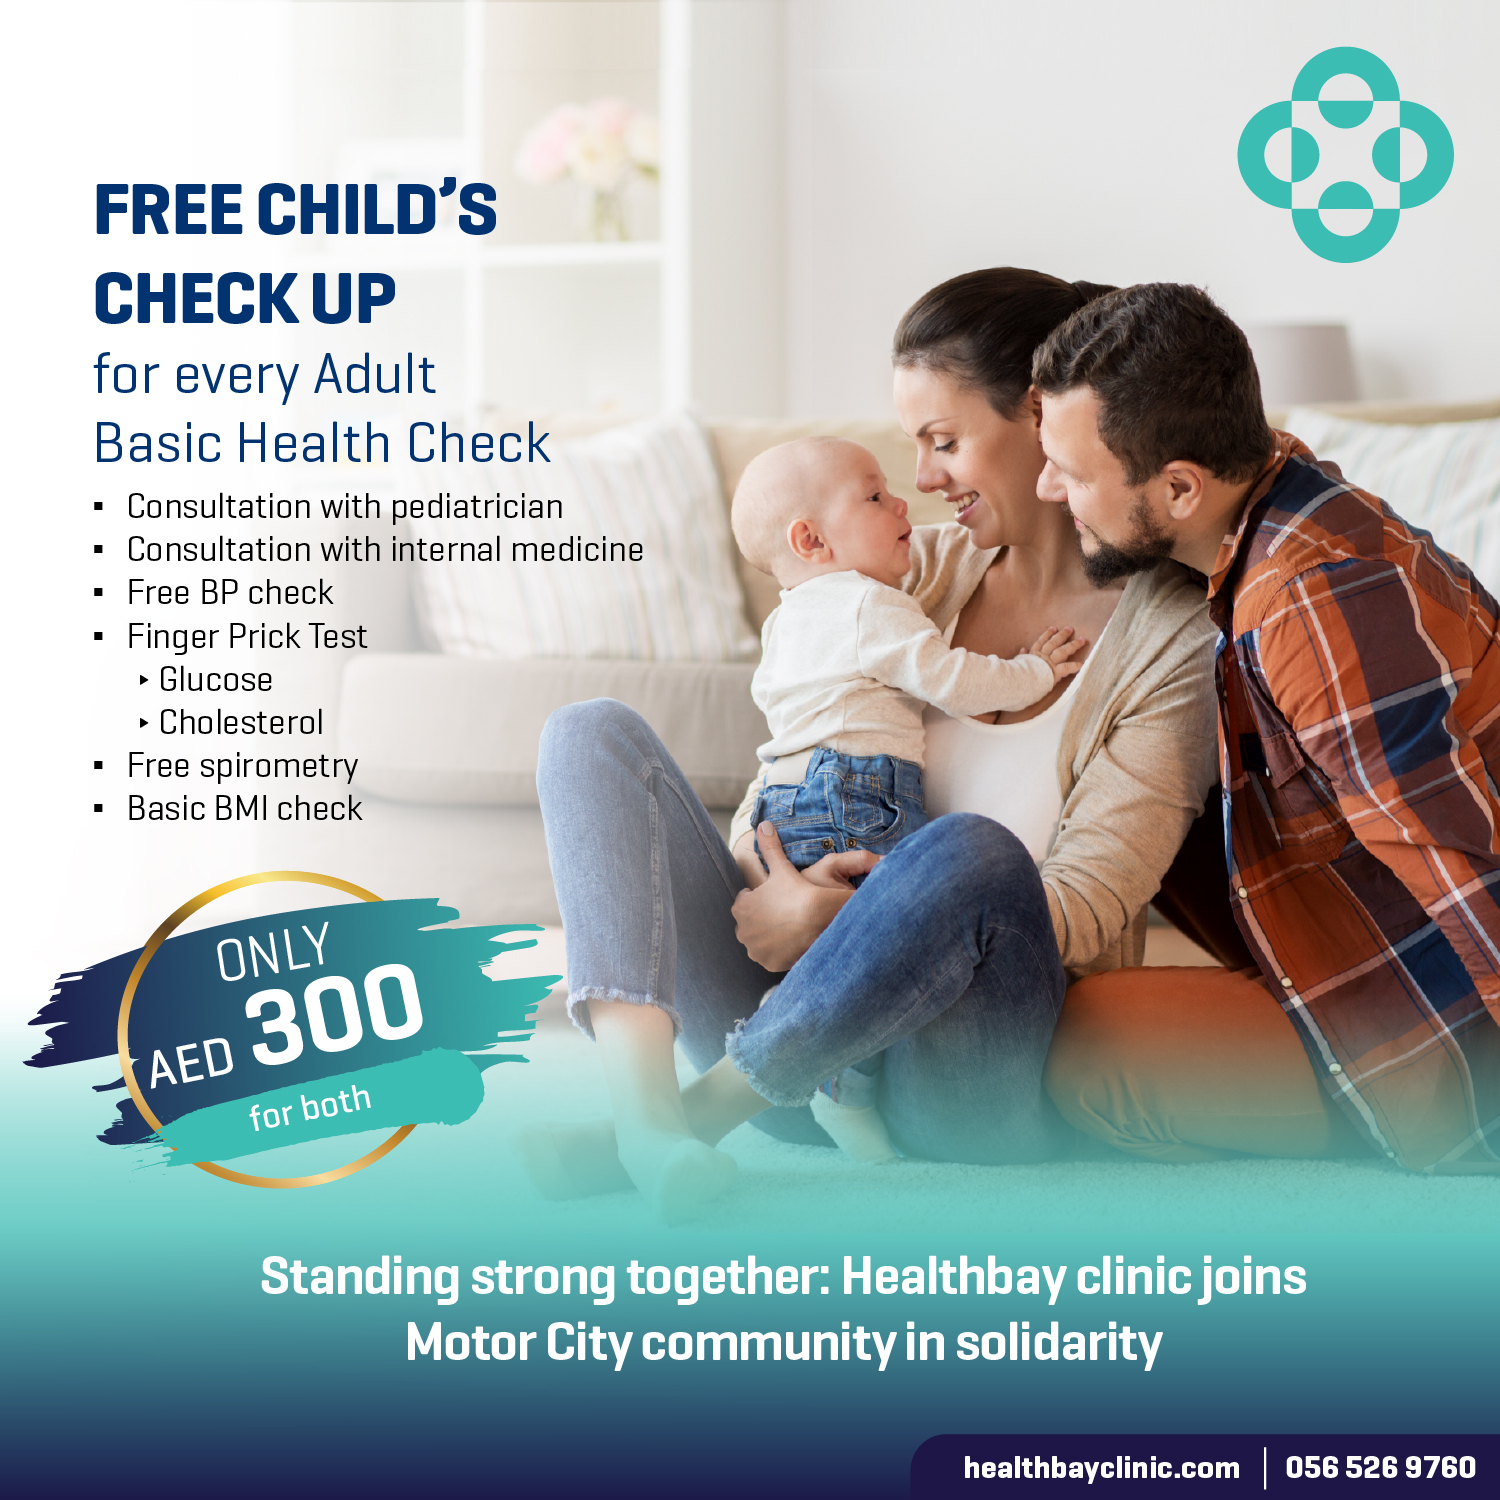 Motor City Health Checkup Limited Time Offer